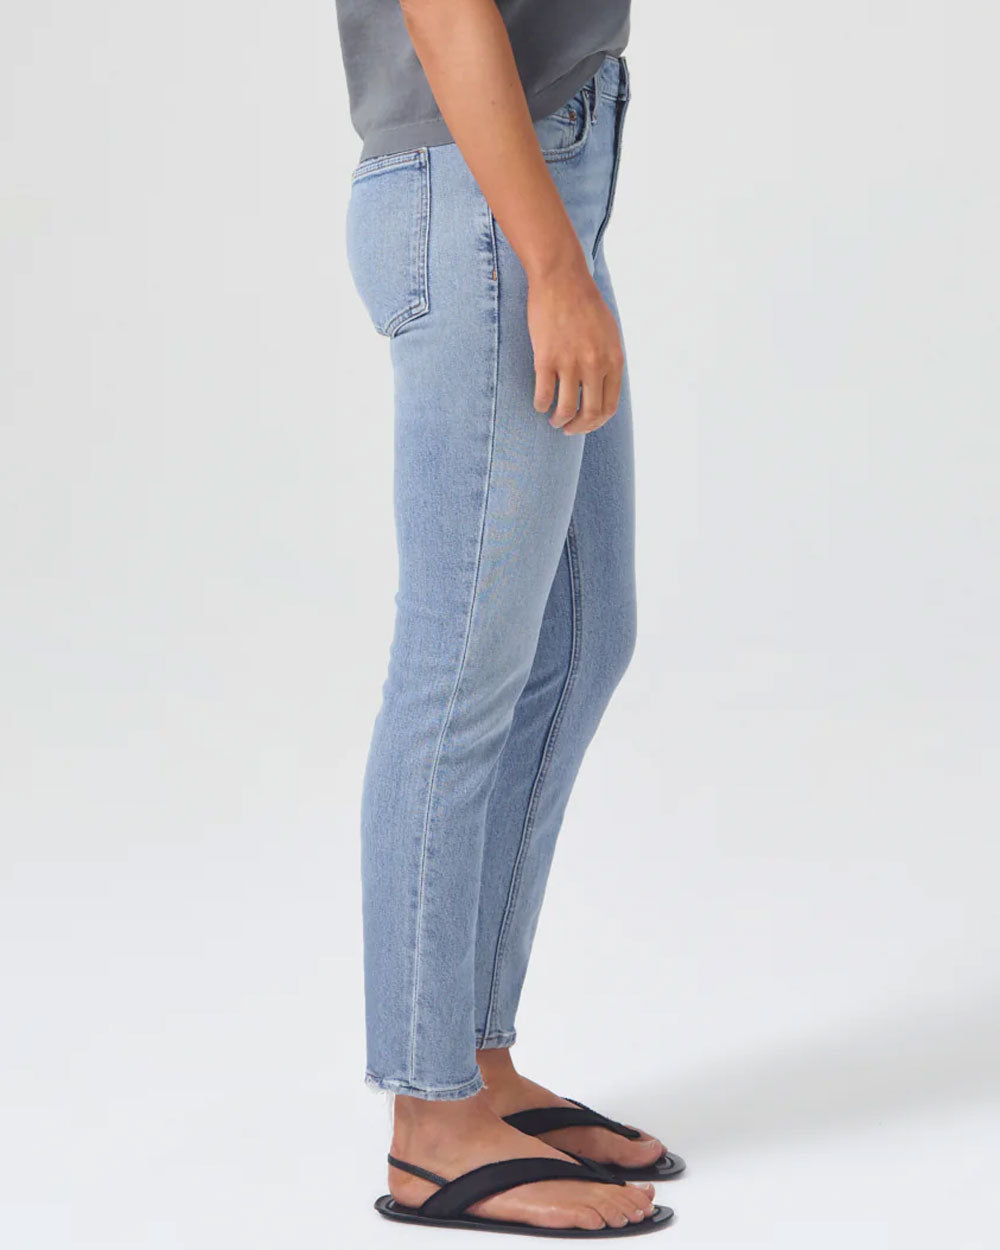 Mid Rise Slim Crop Willow Jean in Torch